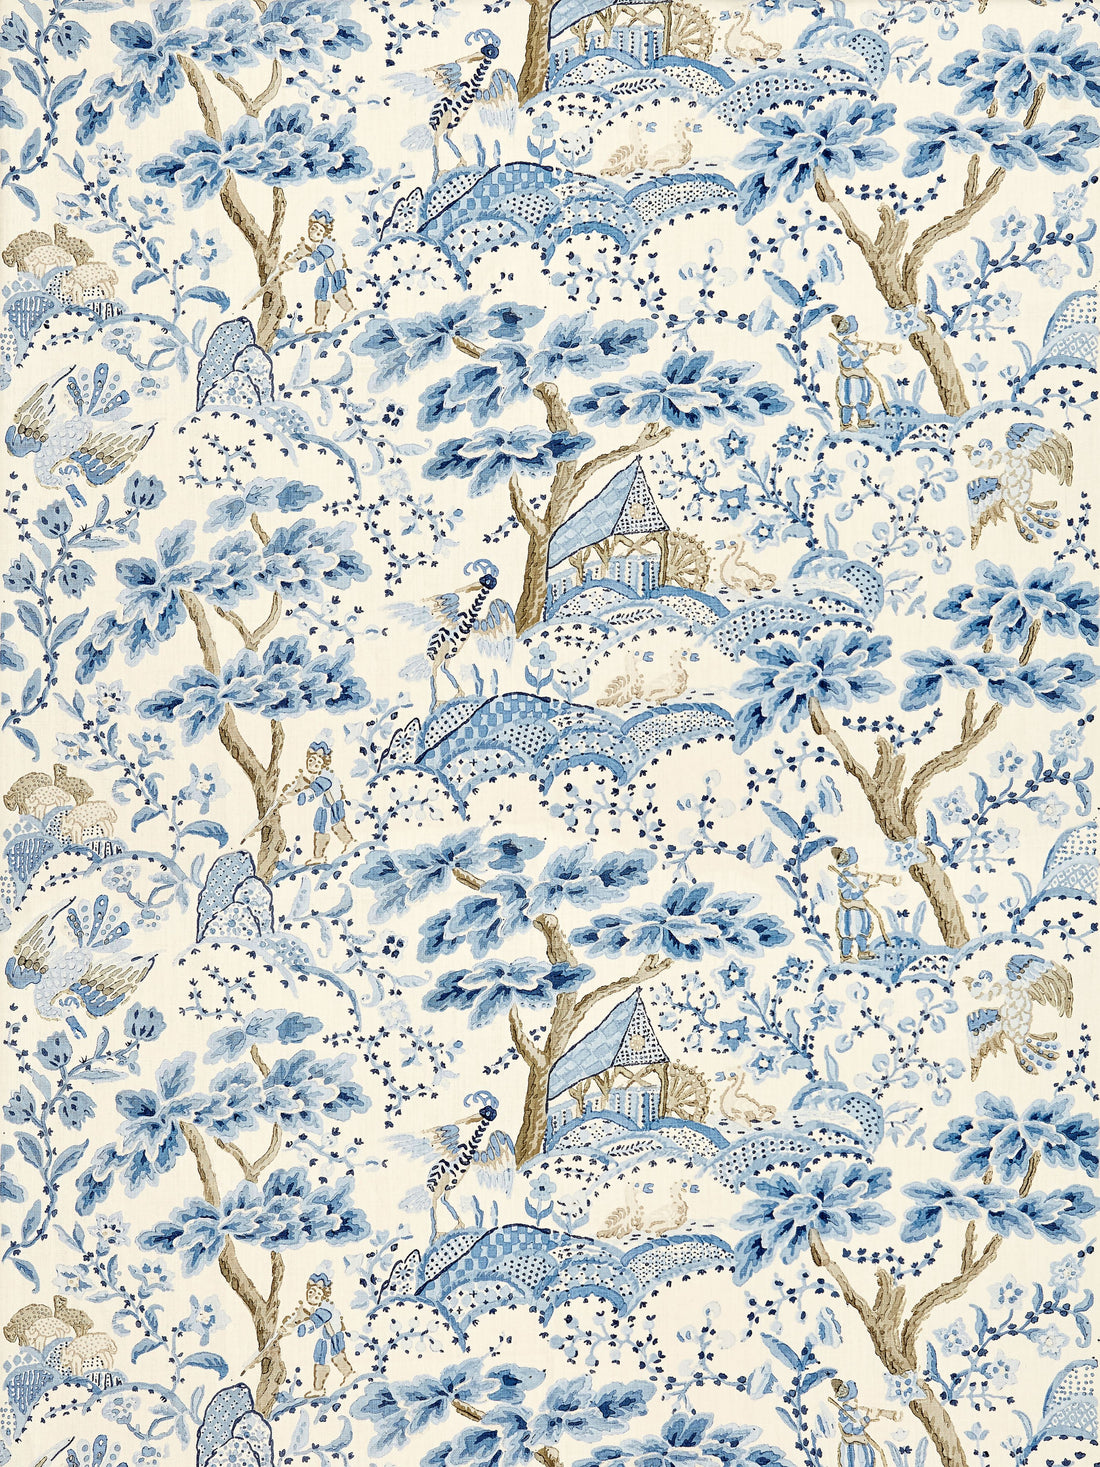 Kelmescott Hand Block Print fabric in porcelain color - pattern number SC 000116590 - by Scalamandre in the Scalamandre Fabrics Book 1 collection